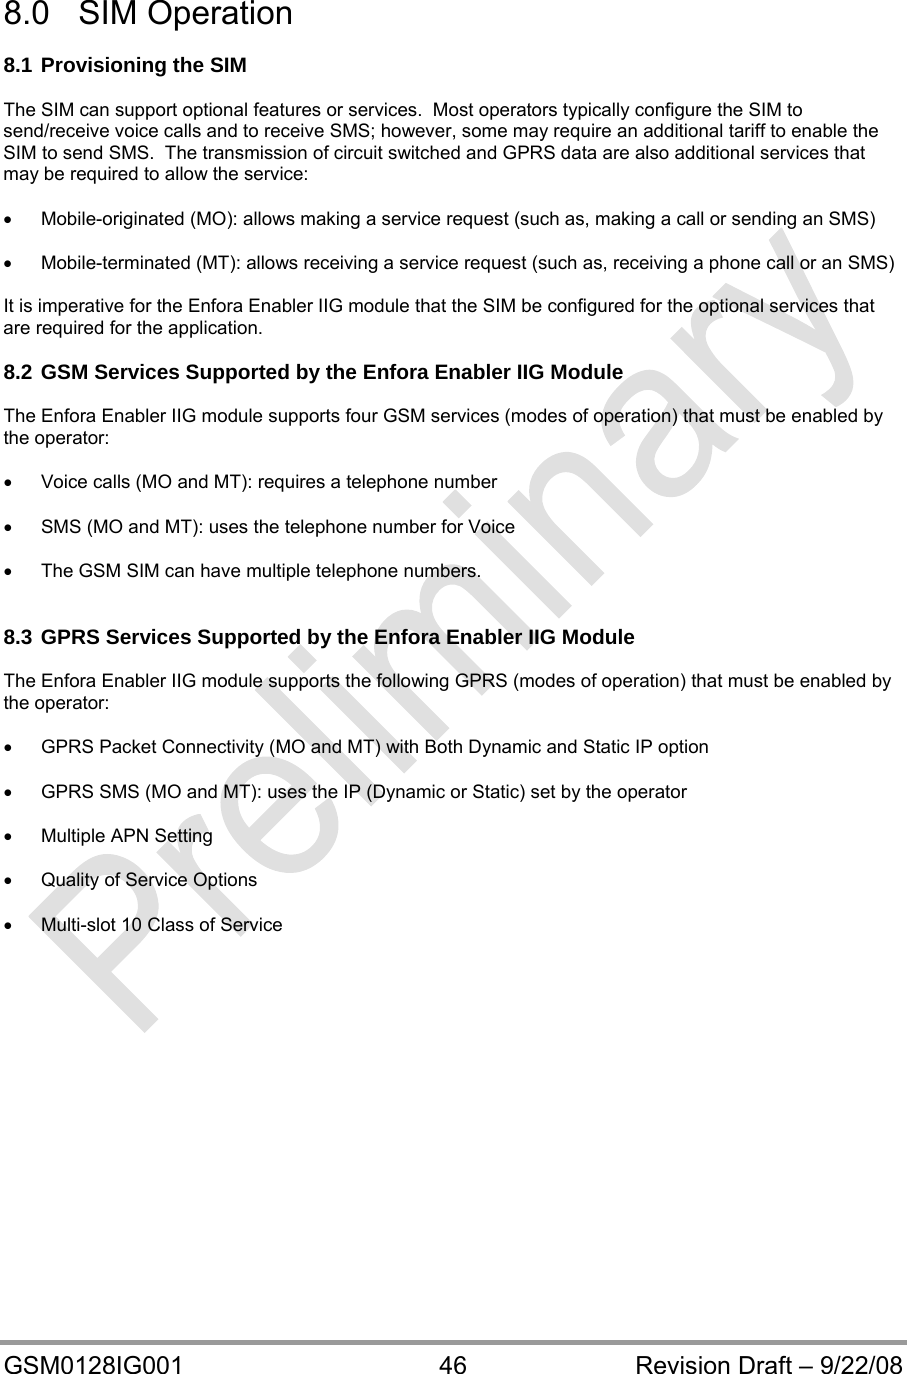  GSM0128IG001  46  Revision Draft – 9/22/08  8.0 SIM Operation  8.1 Provisioning the SIM  The SIM can support optional features or services.  Most operators typically configure the SIM to send/receive voice calls and to receive SMS; however, some may require an additional tariff to enable the SIM to send SMS.  The transmission of circuit switched and GPRS data are also additional services that may be required to allow the service:    Mobile-originated (MO): allows making a service request (such as, making a call or sending an SMS)    Mobile-terminated (MT): allows receiving a service request (such as, receiving a phone call or an SMS)  It is imperative for the Enfora Enabler IIG module that the SIM be configured for the optional services that     are required for the application.  8.2 GSM Services Supported by the Enfora Enabler IIG Module  The Enfora Enabler IIG module supports four GSM services (modes of operation) that must be enabled by     the operator:    Voice calls (MO and MT): requires a telephone number    SMS (MO and MT): uses the telephone number for Voice    The GSM SIM can have multiple telephone numbers.   8.3 GPRS Services Supported by the Enfora Enabler IIG Module  The Enfora Enabler IIG module supports the following GPRS (modes of operation) that must be enabled by the operator:    GPRS Packet Connectivity (MO and MT) with Both Dynamic and Static IP option    GPRS SMS (MO and MT): uses the IP (Dynamic or Static) set by the operator    Multiple APN Setting    Quality of Service Options    Multi-slot 10 Class of Service    